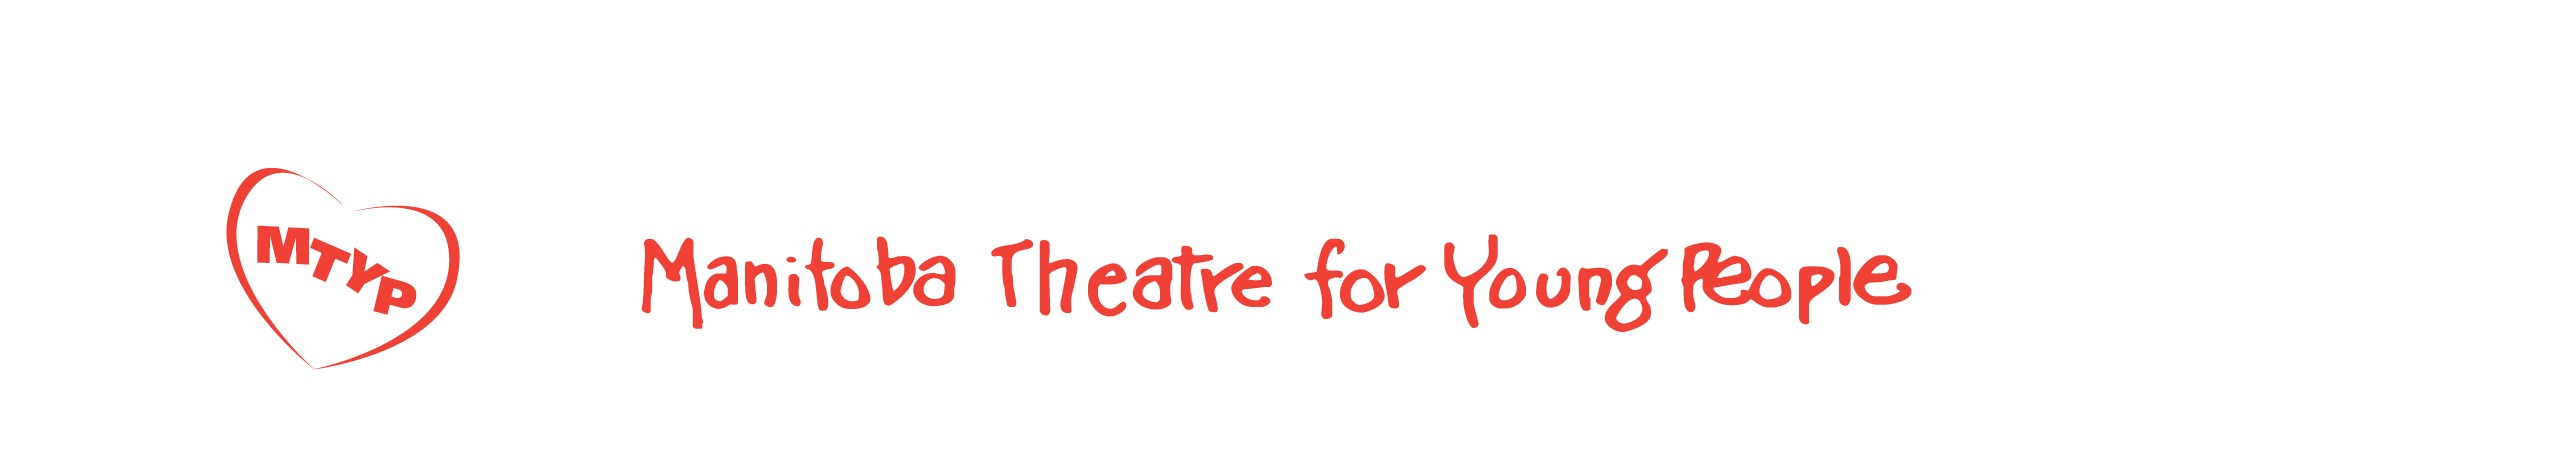 Manitoba Theatre for Young People in a comic-sans type font, with a heart logo to the left.